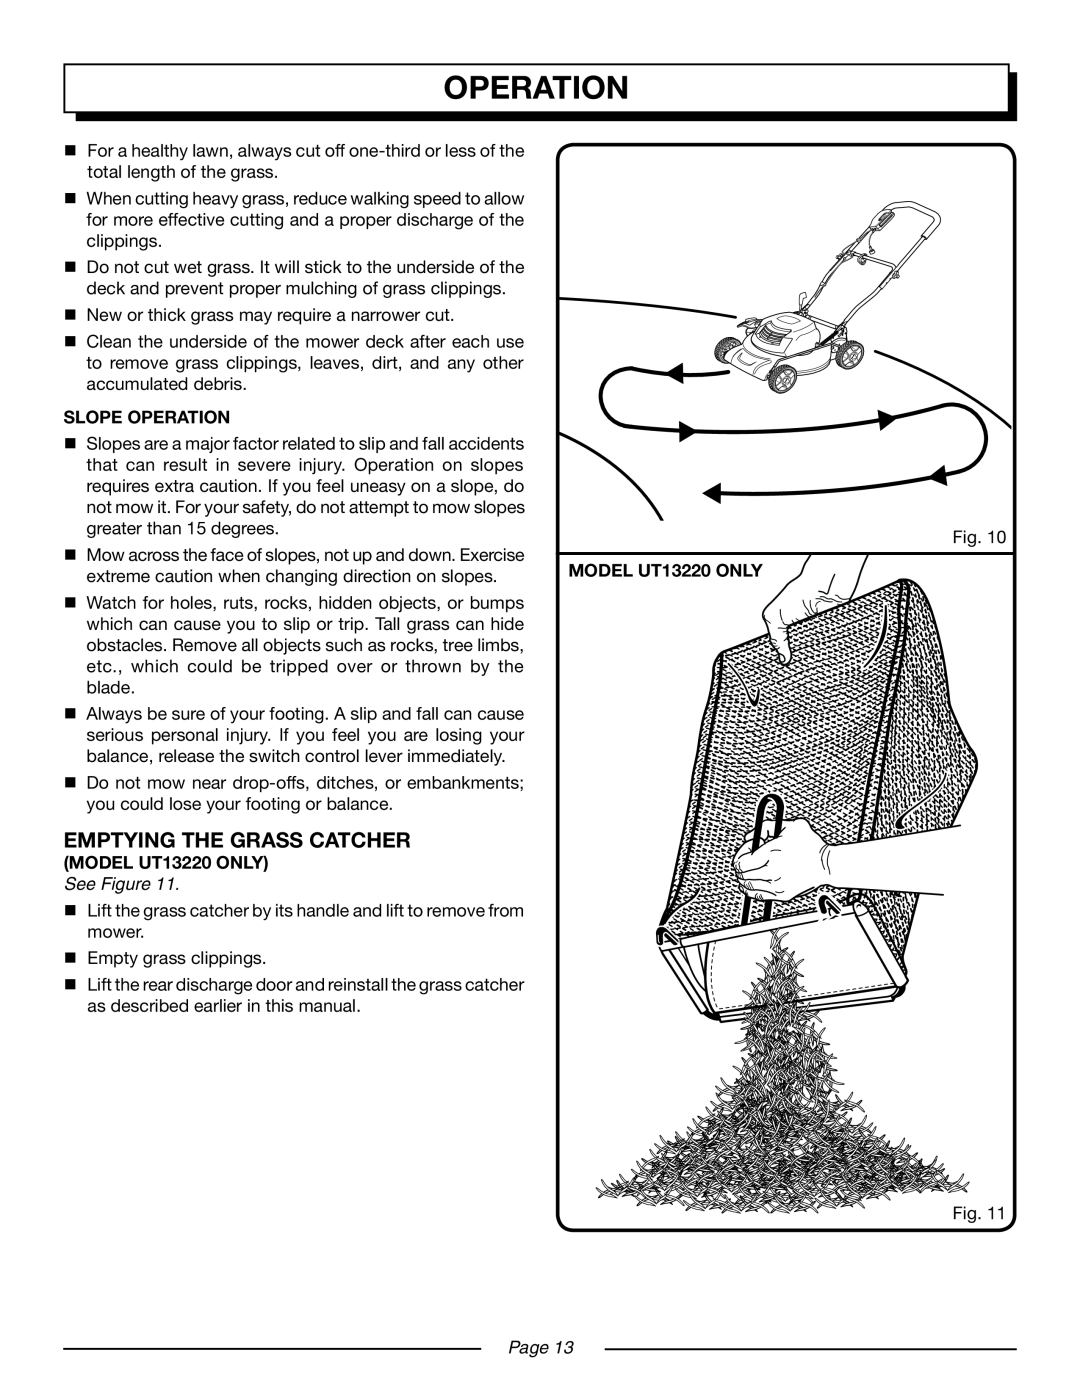 Homelite UT13218 manual Slope Operation, EMPTYING THE GRASS CATCHER MODEL UT13220 ONLY, See Figure, Page 